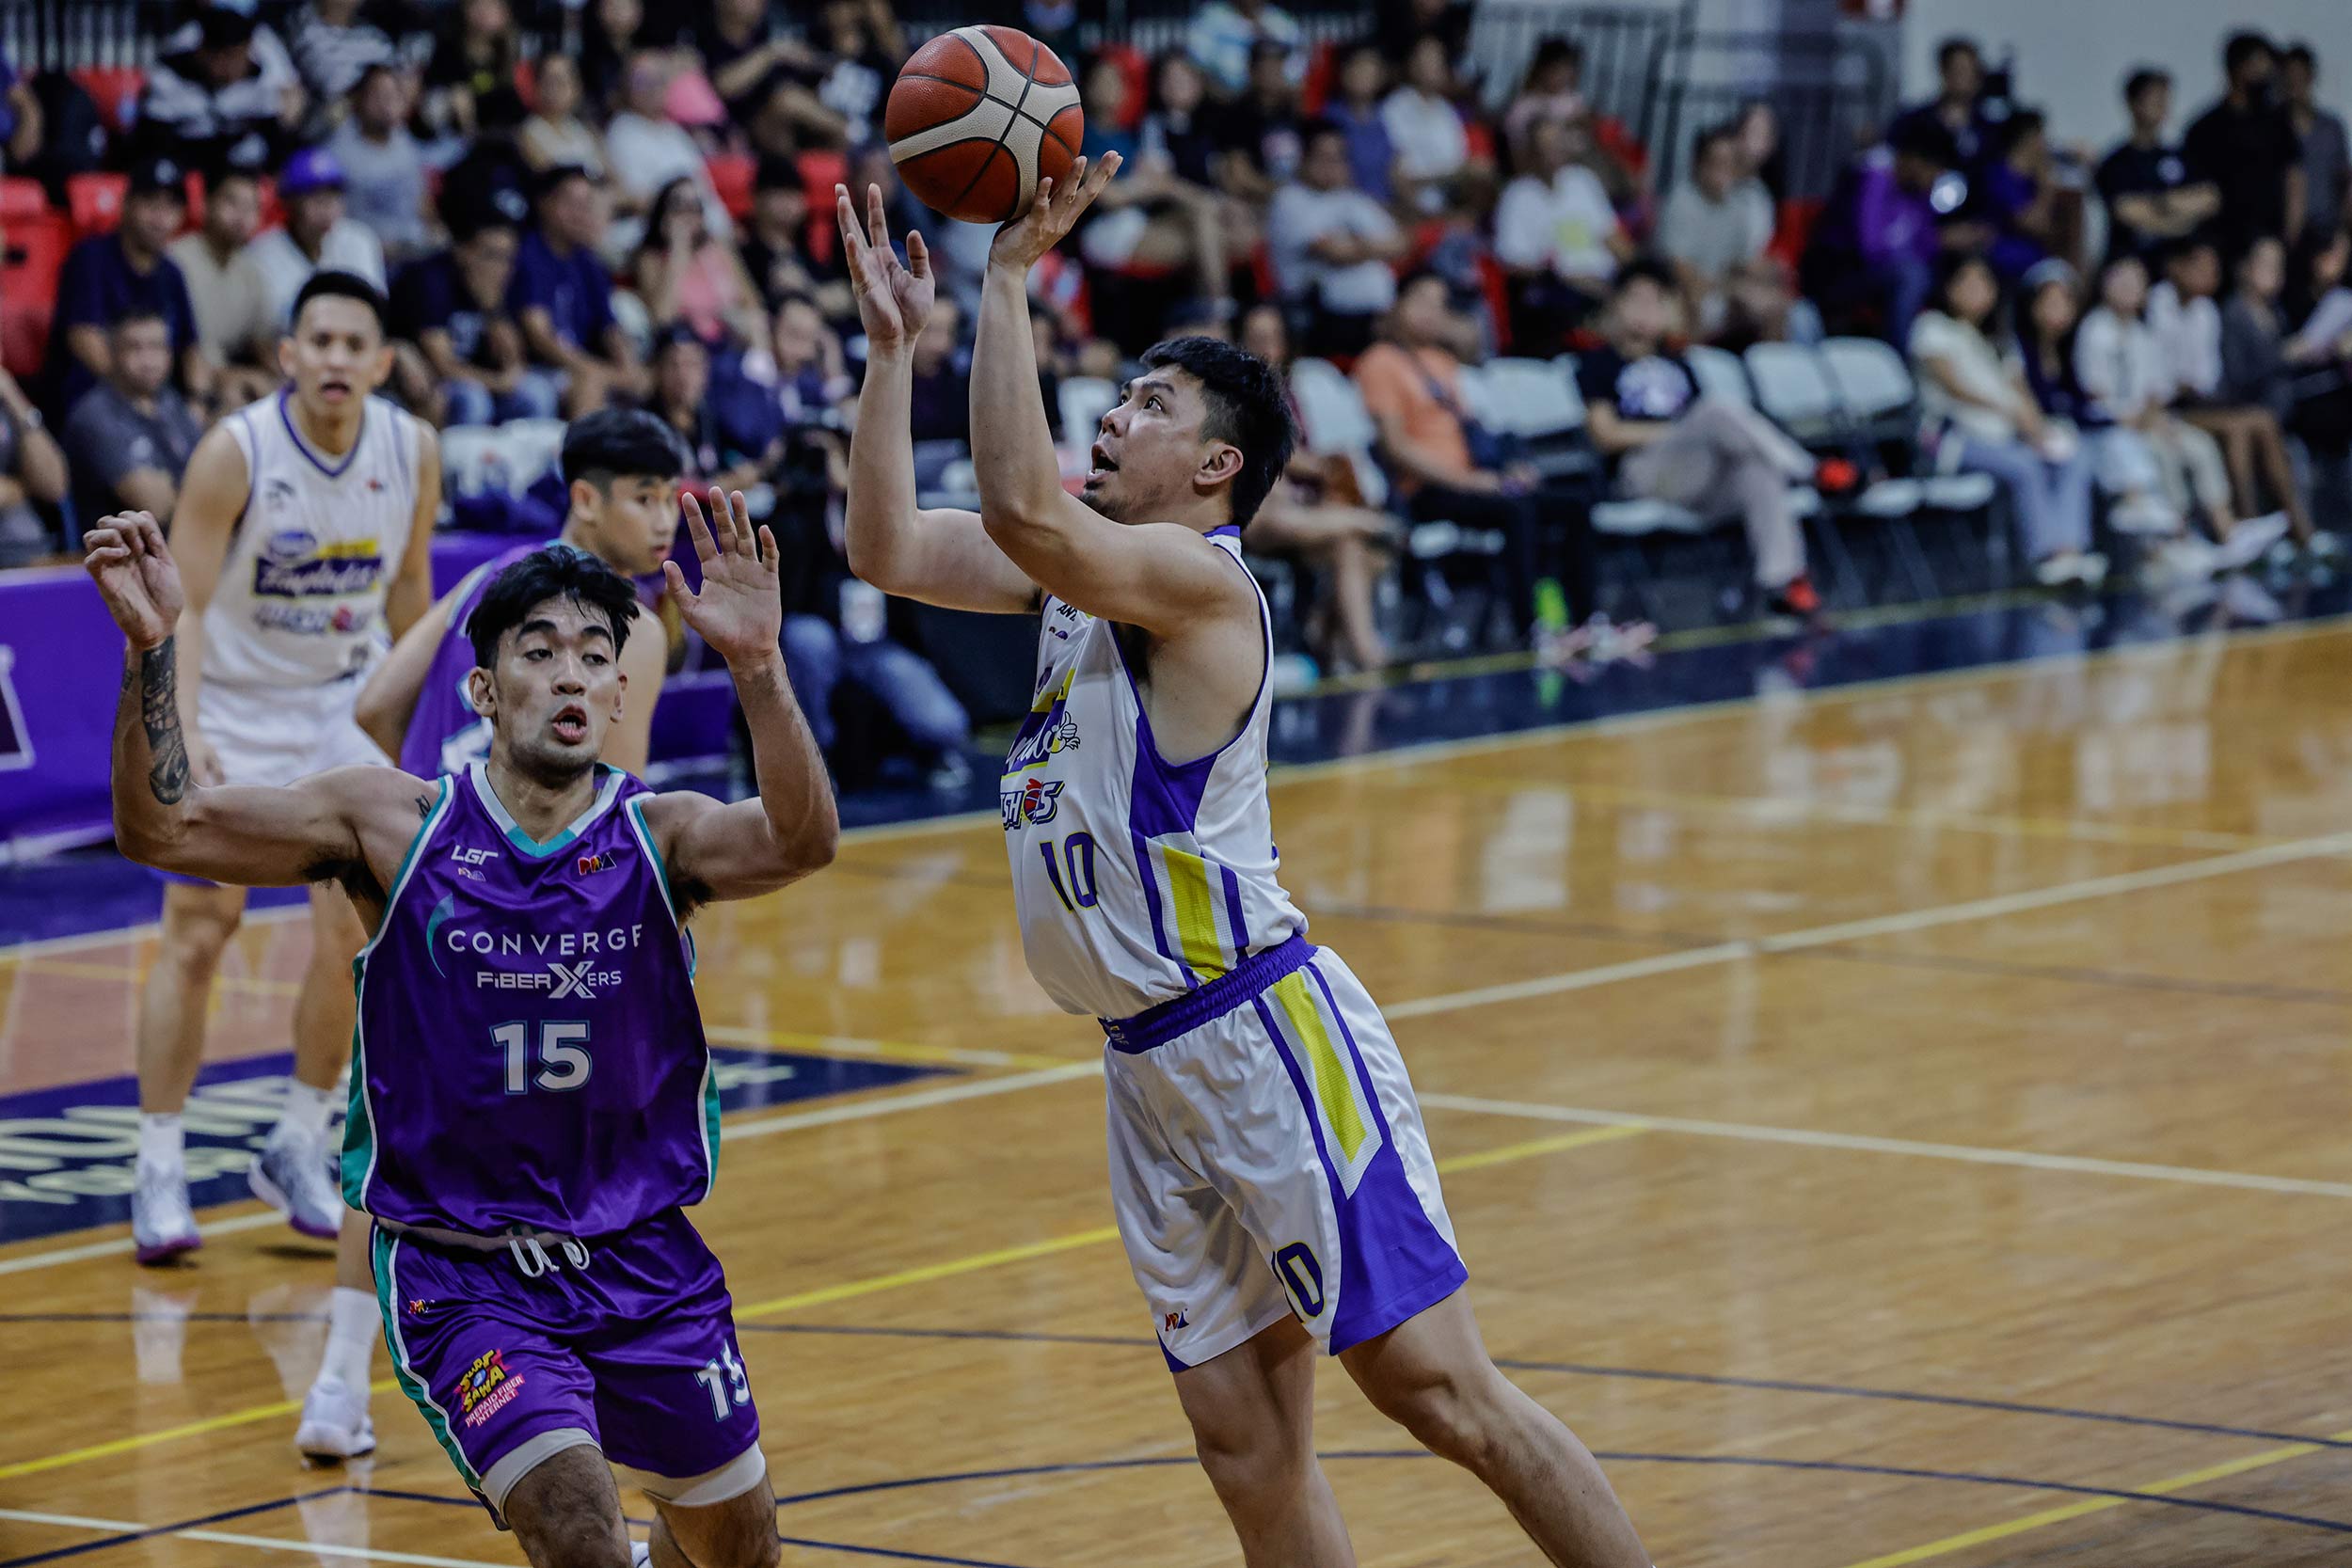 Ian Sangalang battles for a basket in Magnolia's game versus Converge